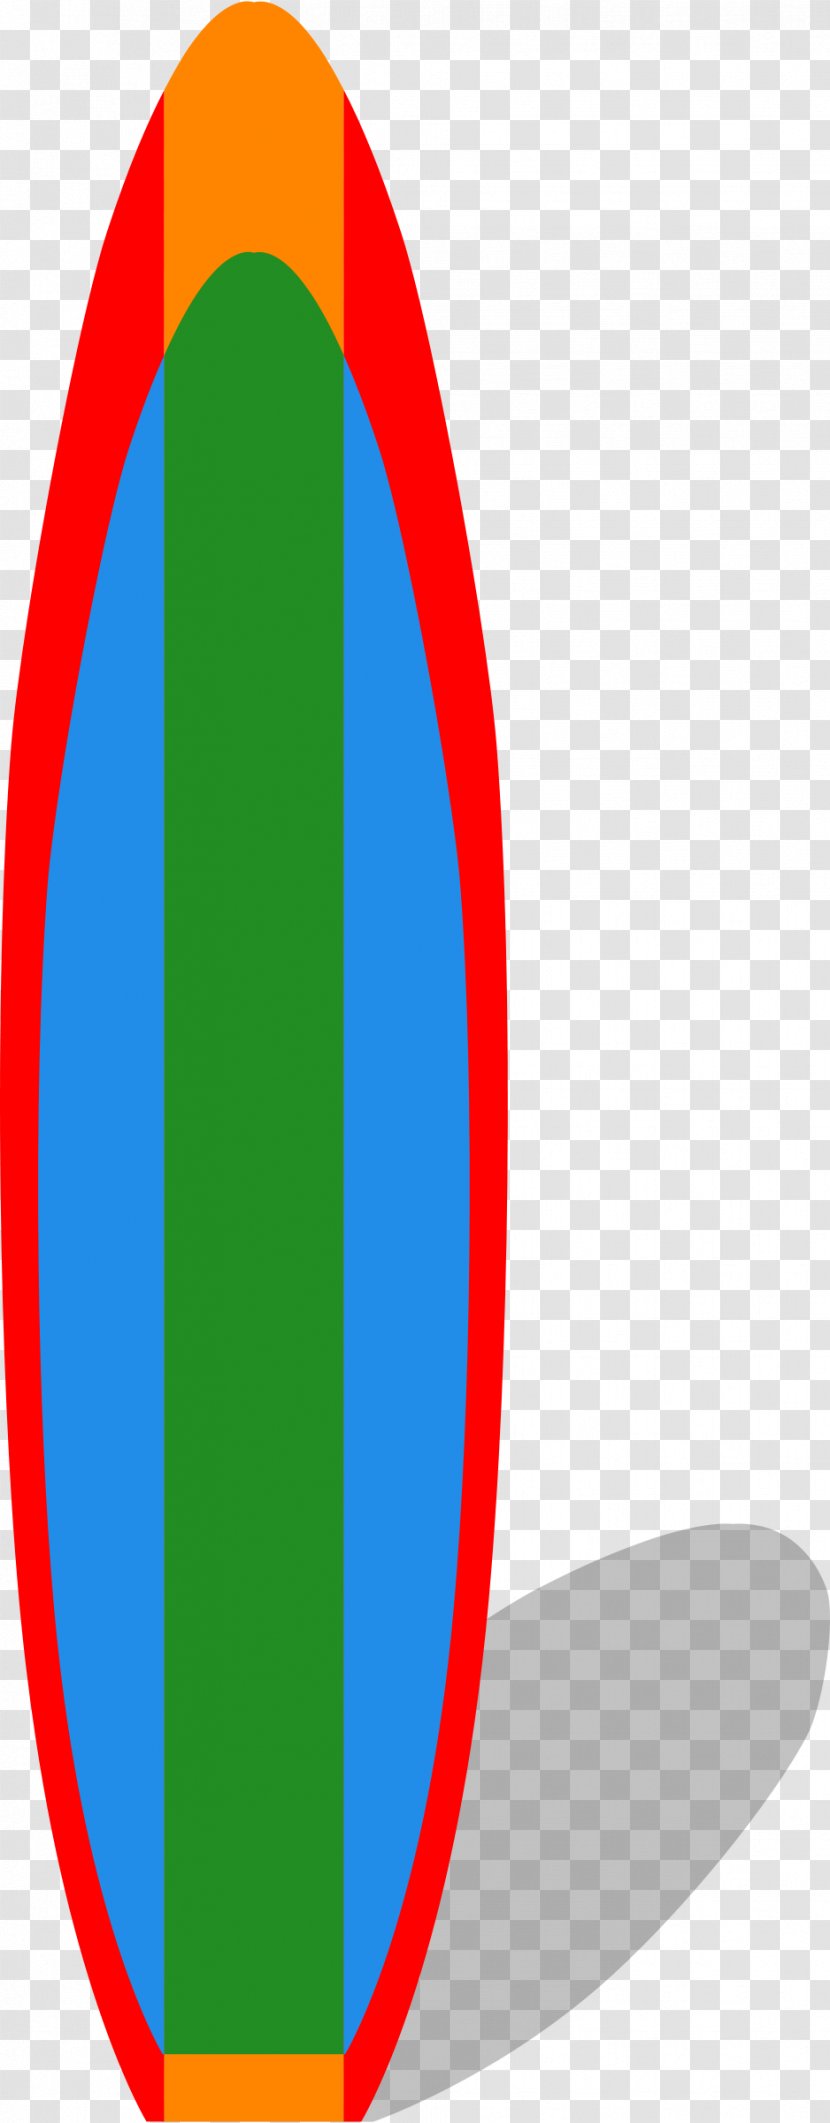 Surfboard Surfing Free Content Clip Art - Area - Surf Cliparts Transparent PNG